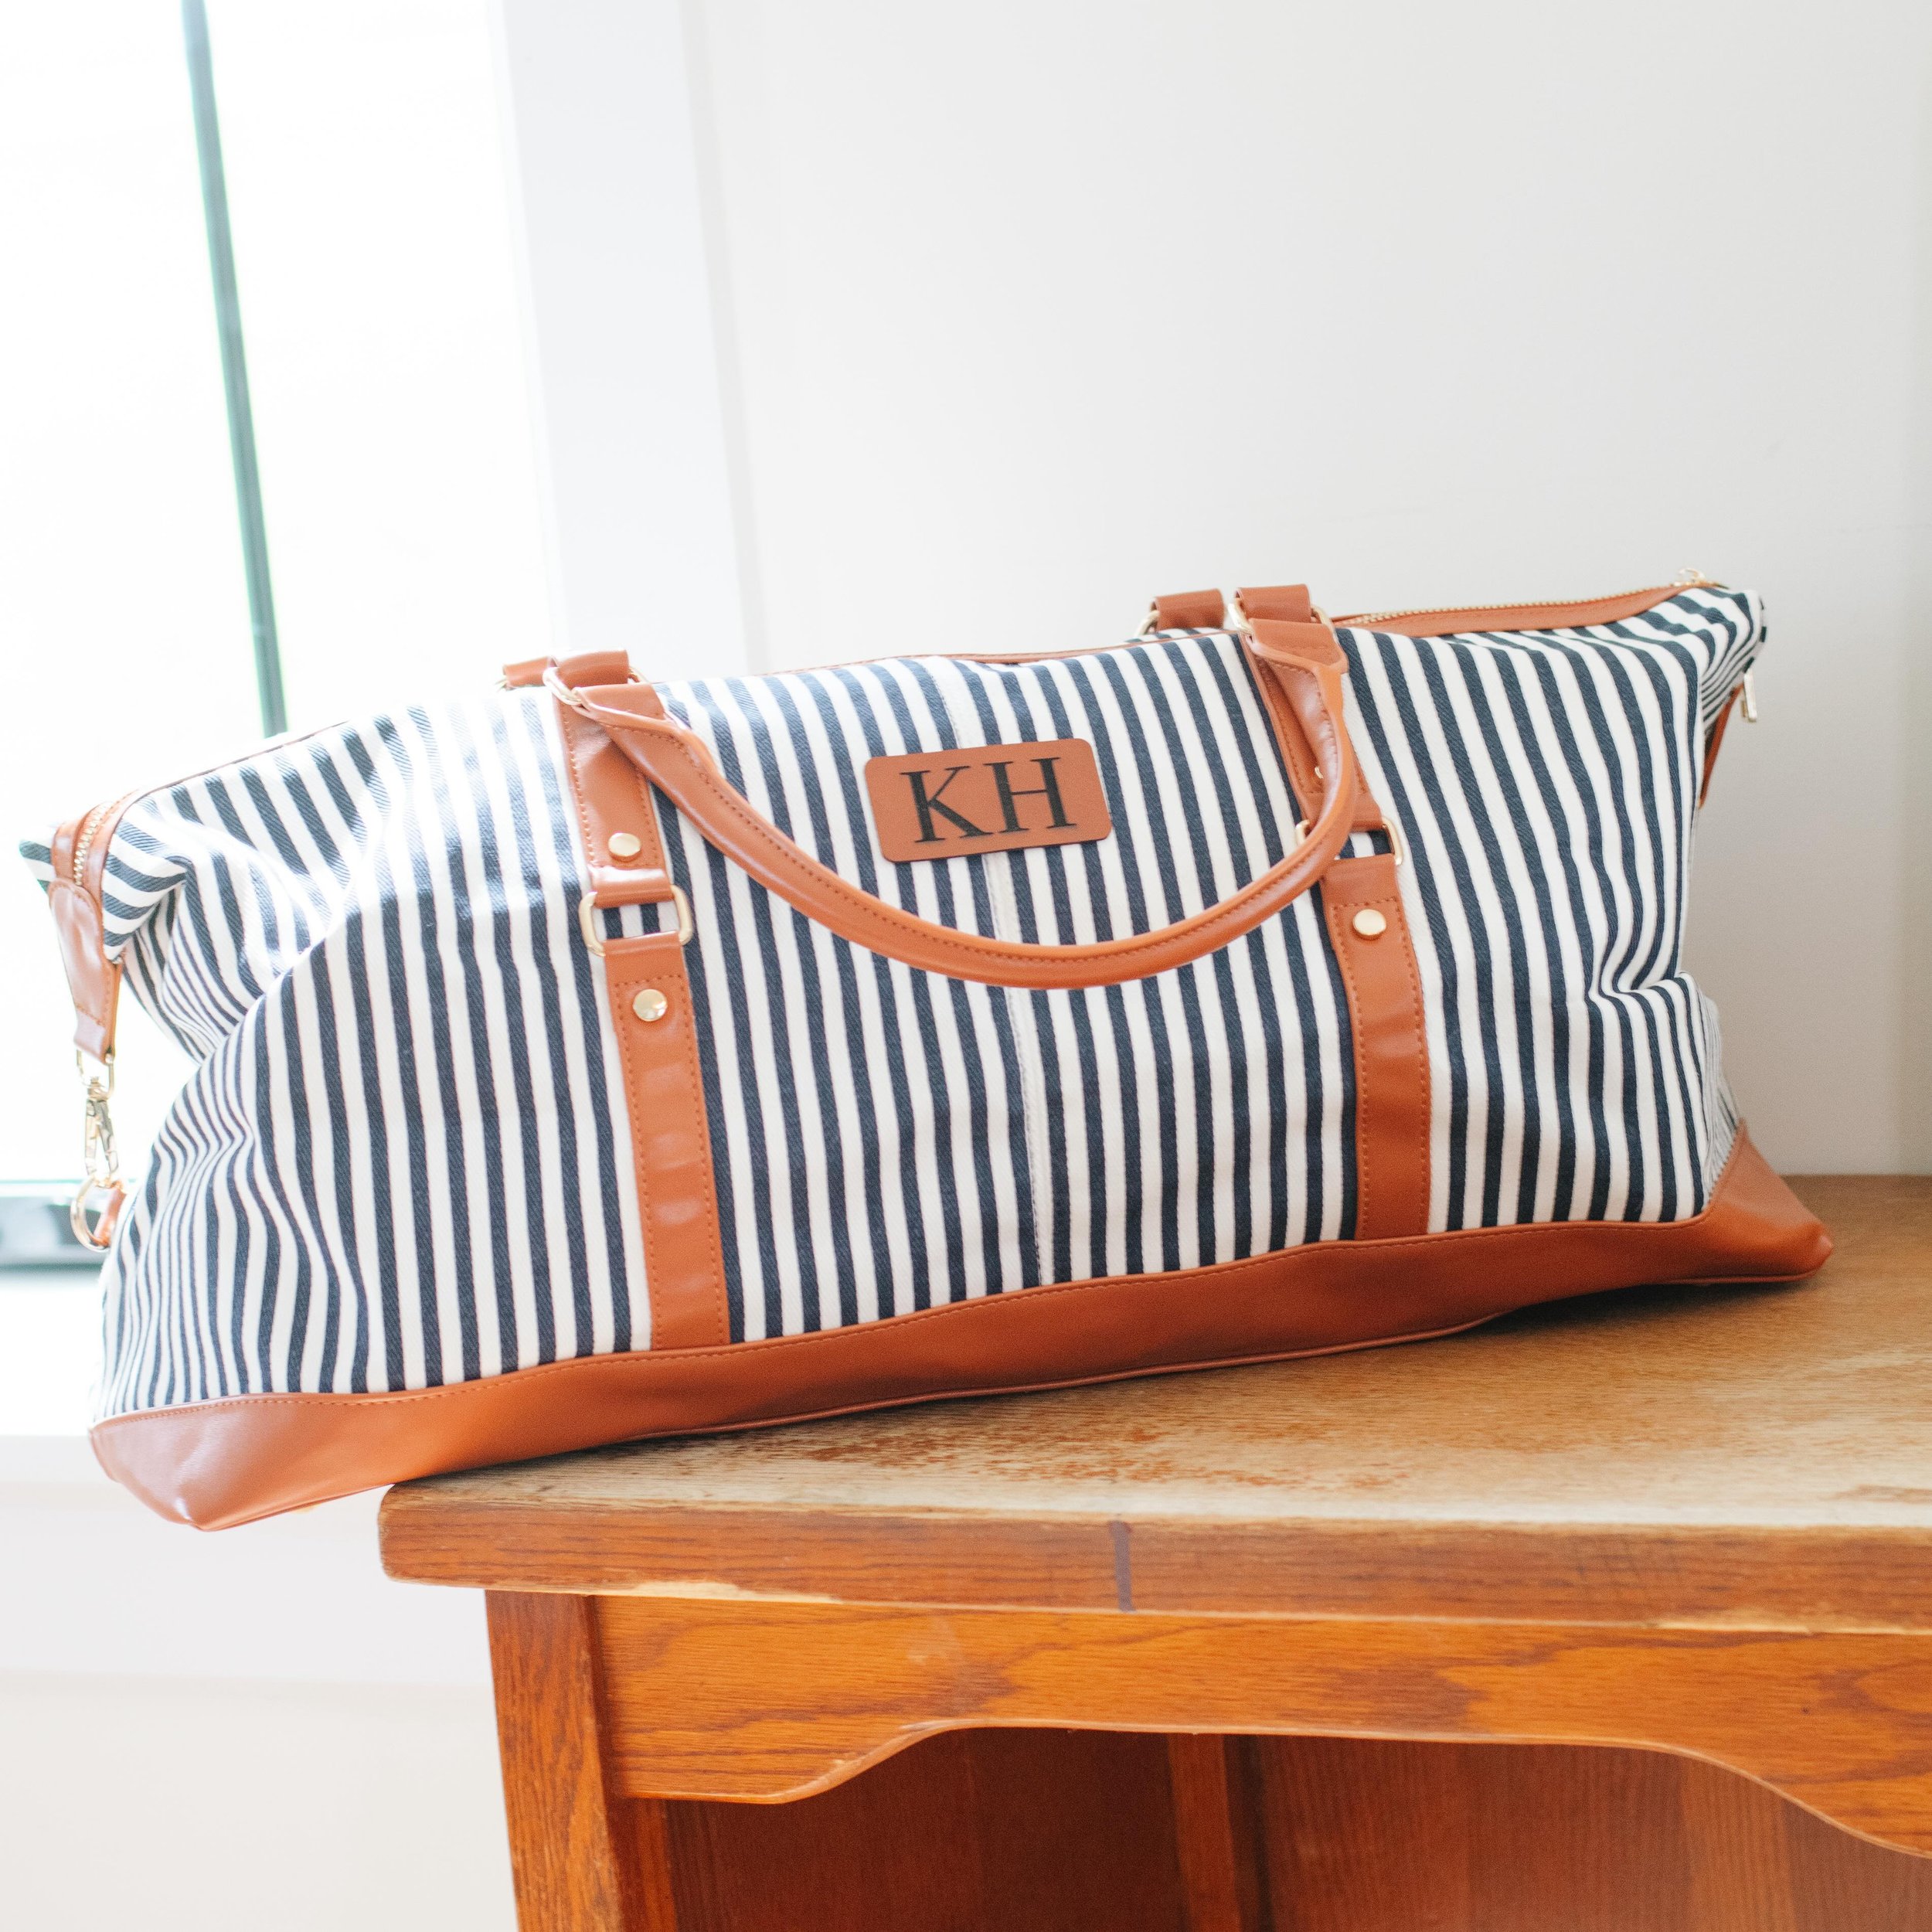 I didn&rsquo;t give this utility tote the attention it deserved this Mothers Day Launch. She&rsquo;s a real beaut, very Jillian Harris. The stripes, the leather, the hardware - I know I&rsquo;ll definitely be keeping one for myself 😉

You&rsquo;ve s